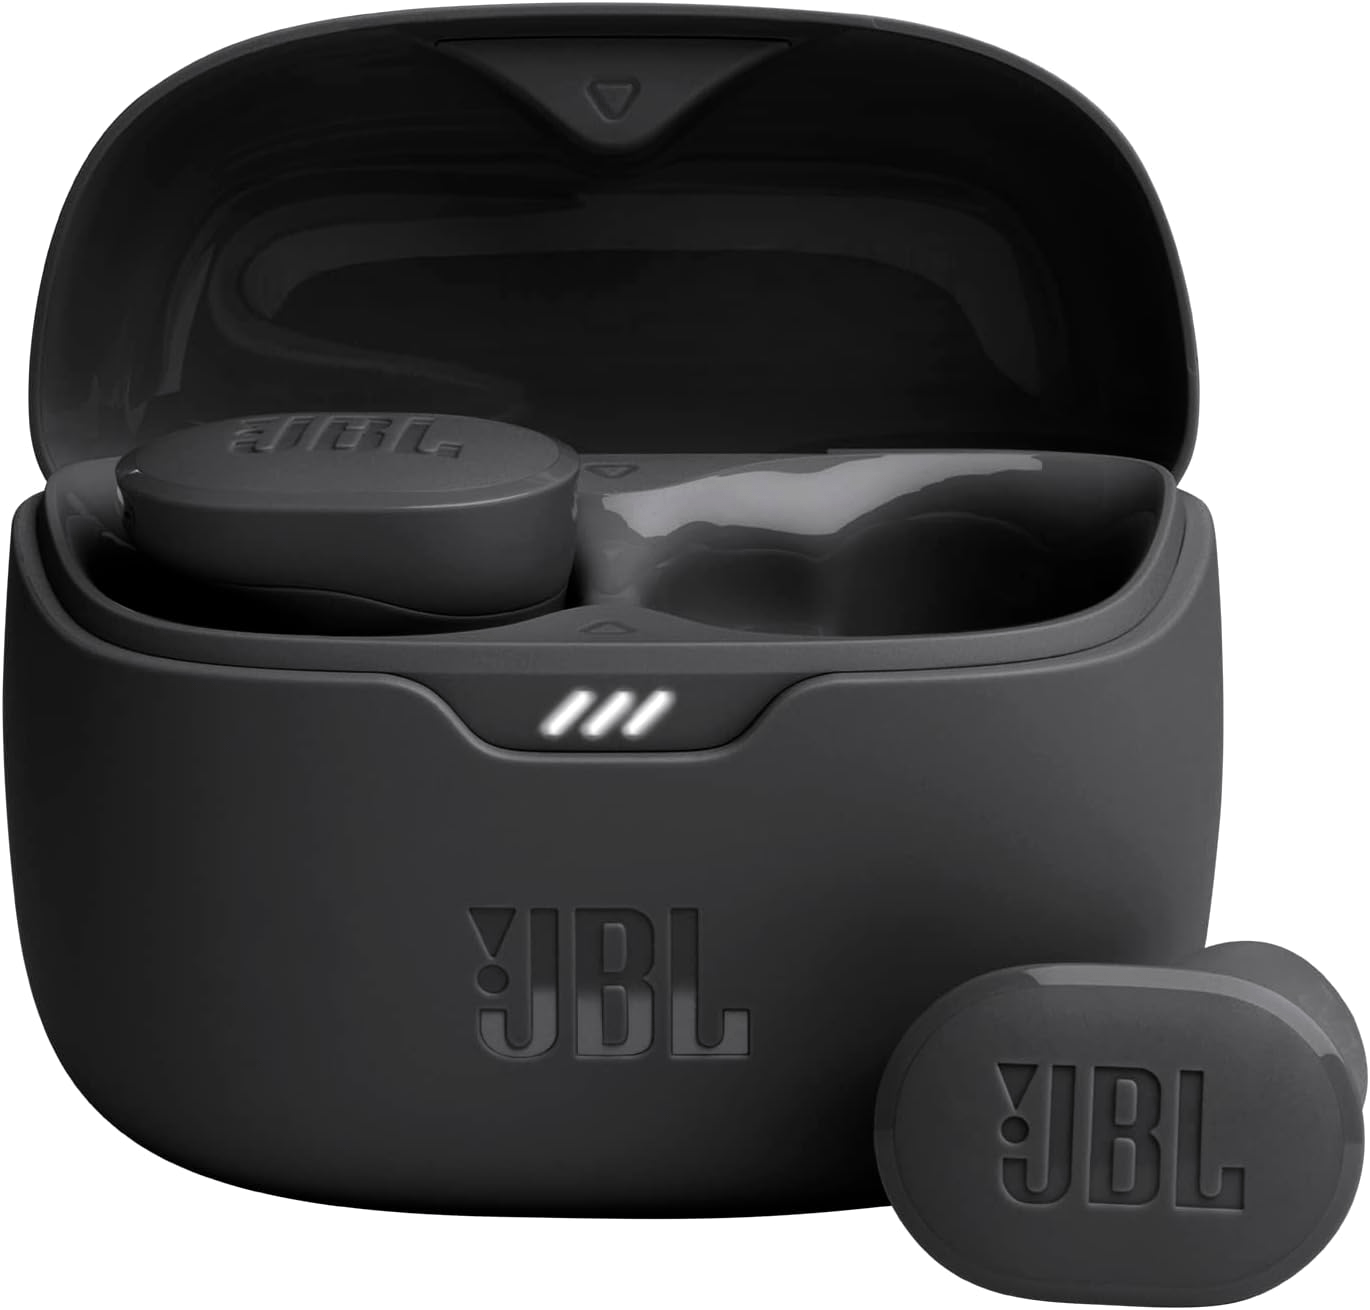 Early Black Friday Earbud Deals - JBL Tune Buds
